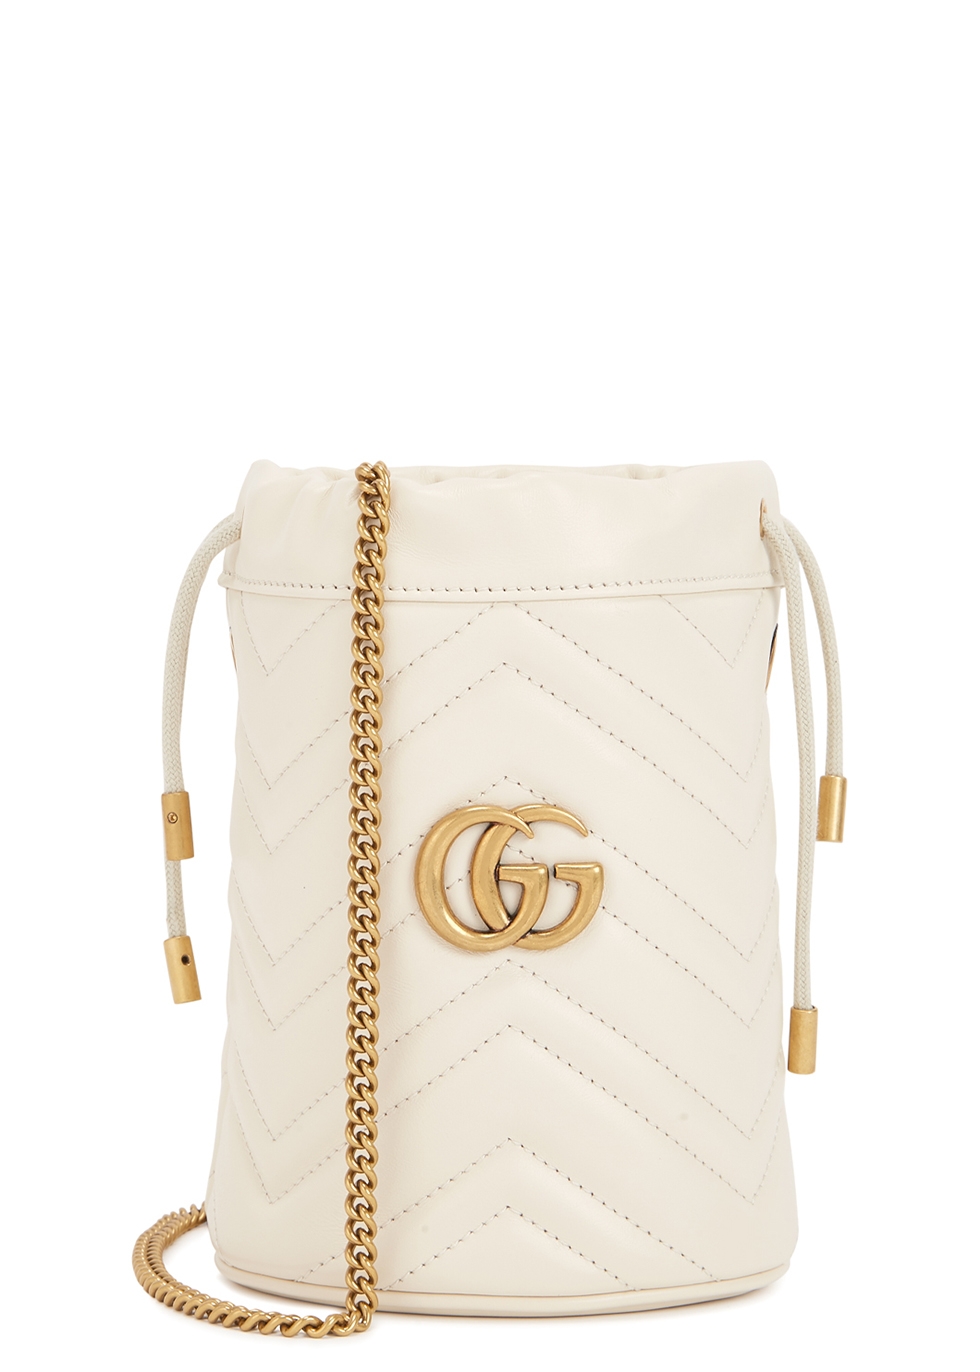 gucci marmont ivory